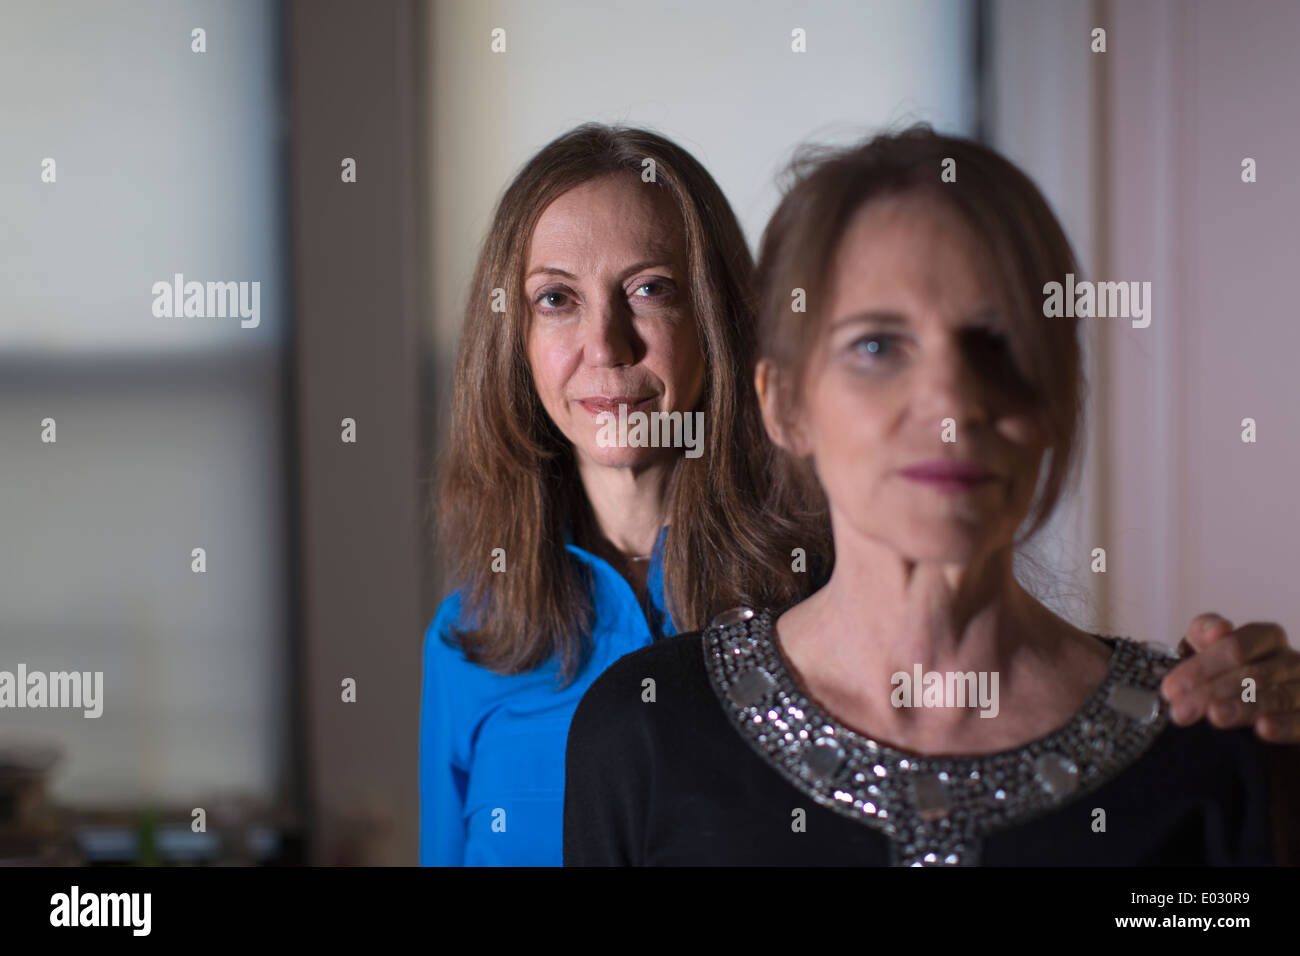 Two women standing one behind the other. Stock Photo